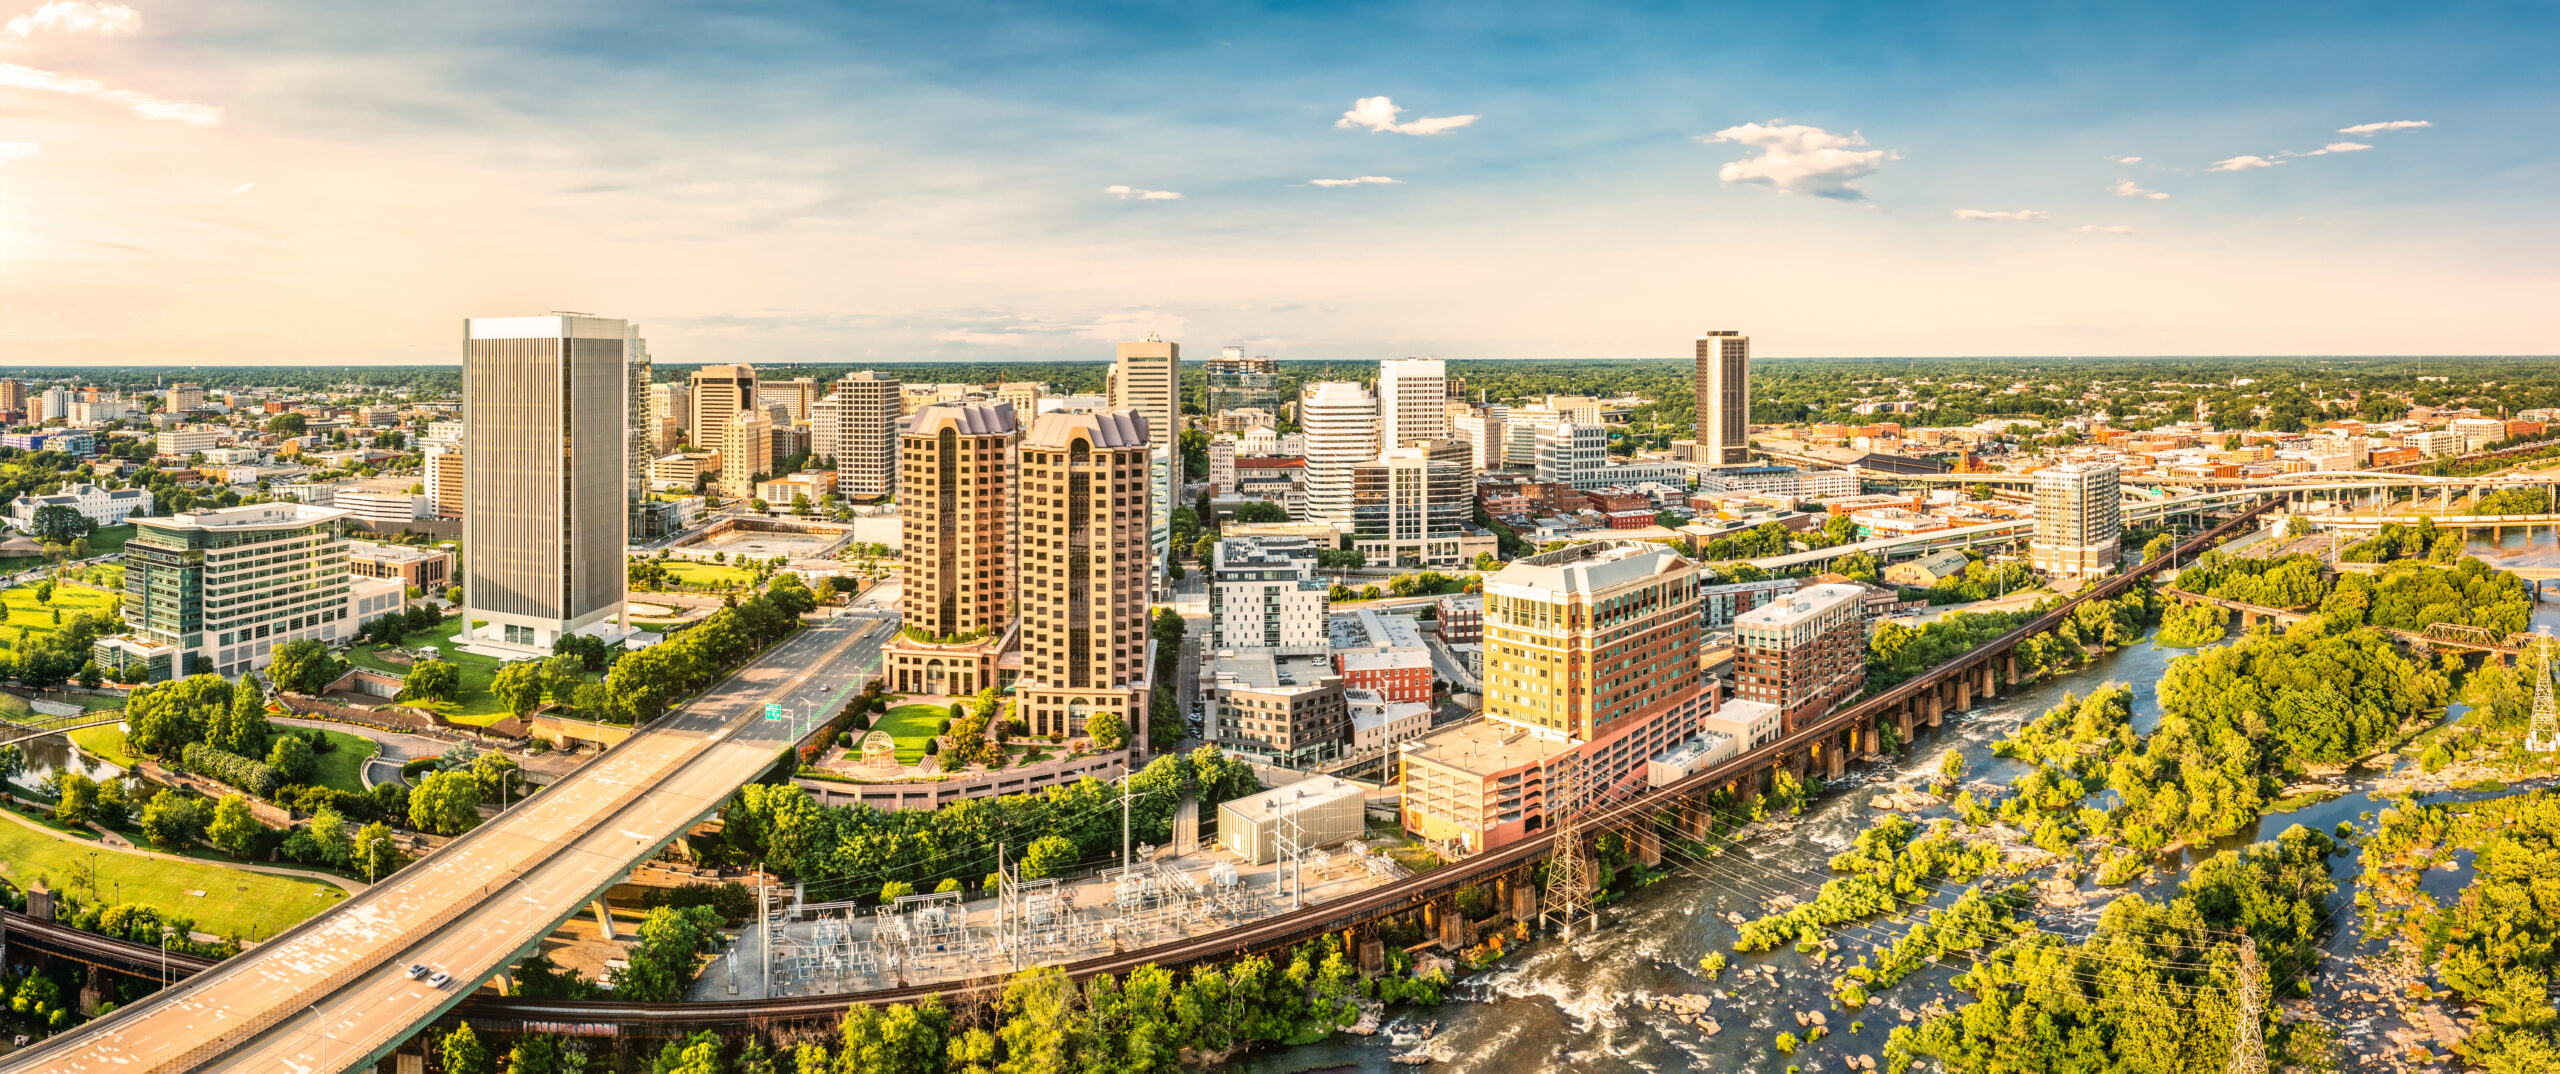 Aerial panorama of Richmond, Virginia, at sunset. Richmond is the capital city of the Commonwealth of Virginia. Manchester Bridge spans James River